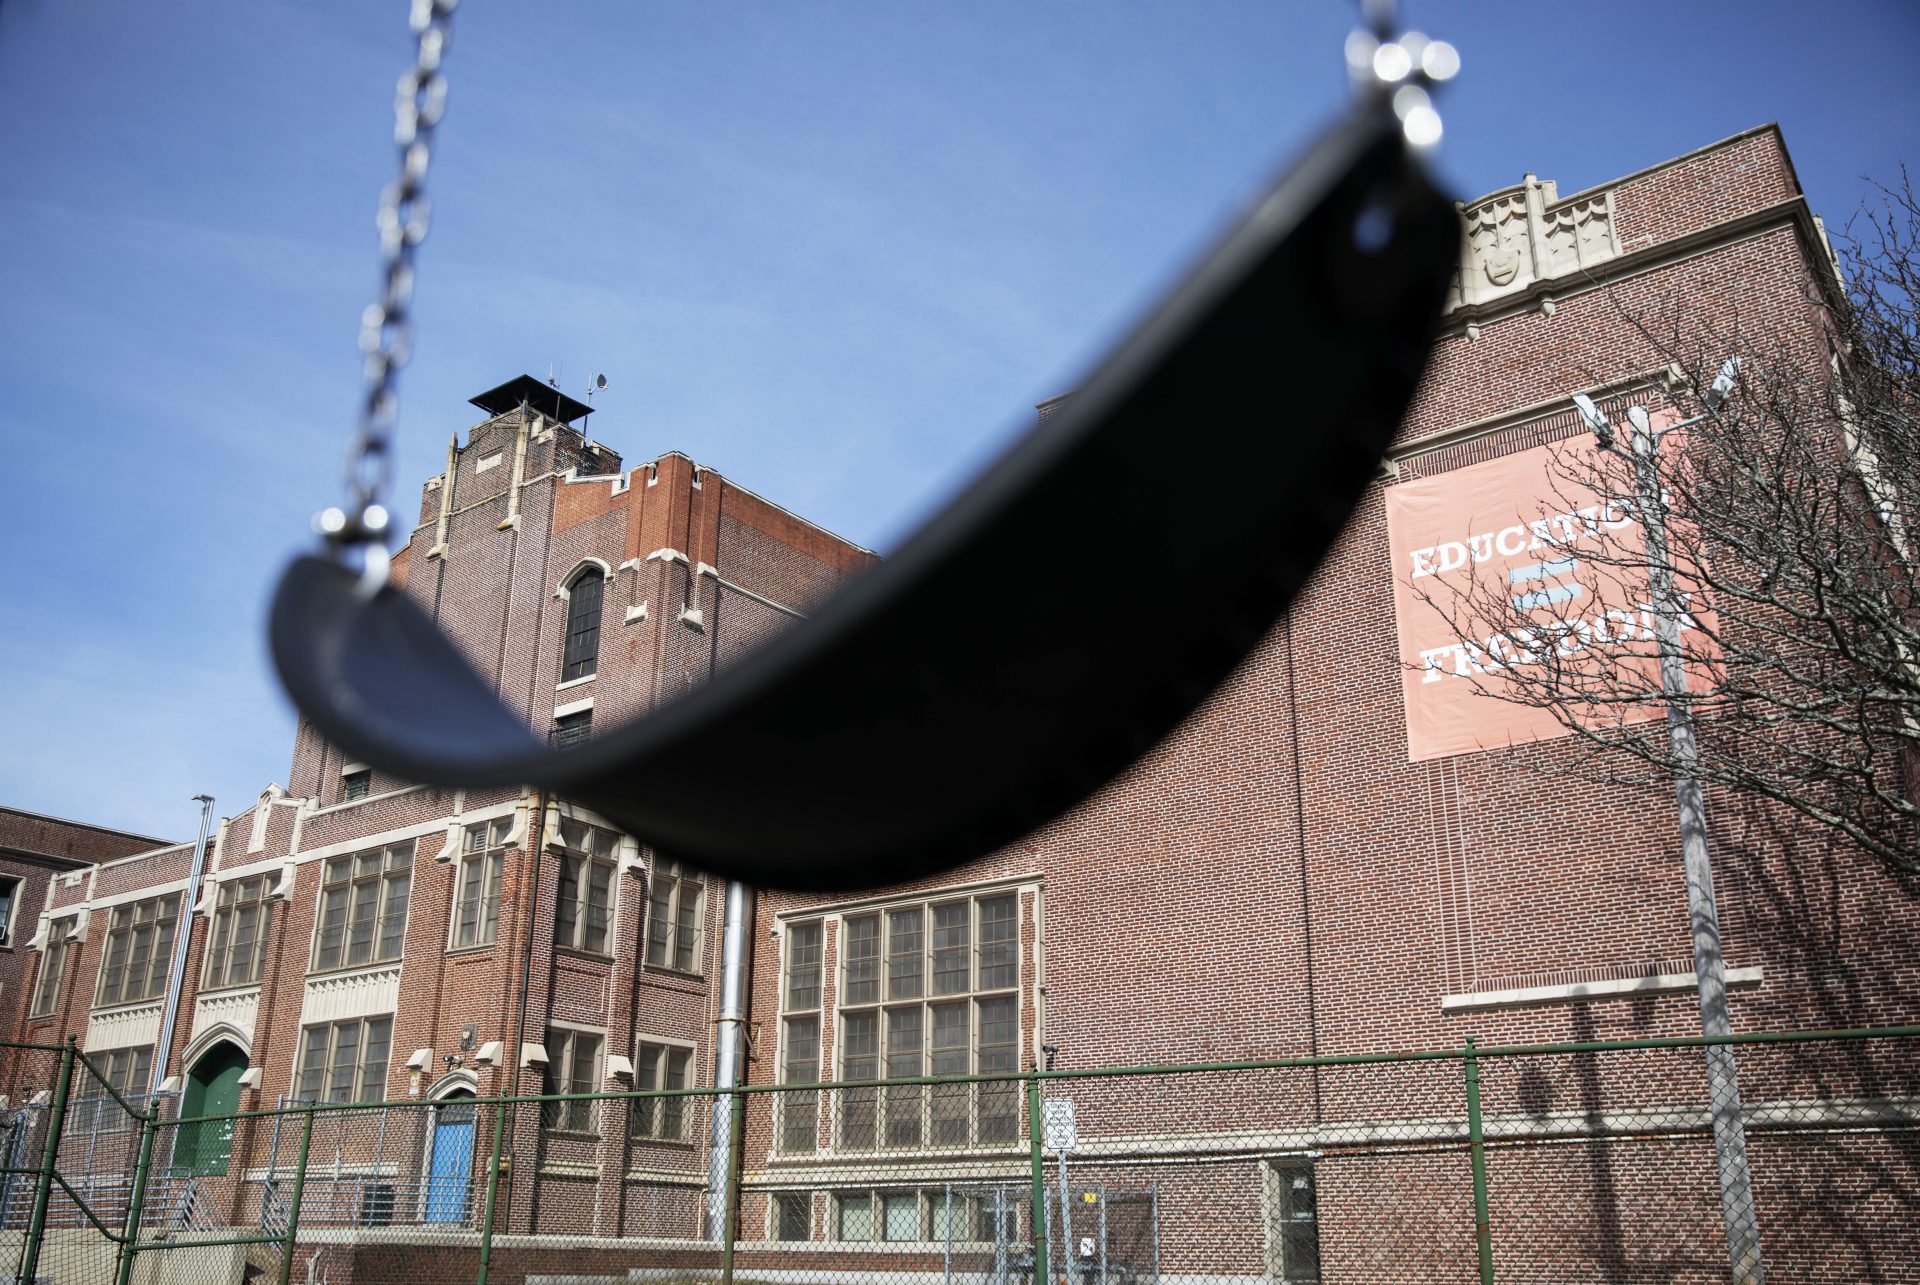 In this March 7, 2020 file photo, a swing sits empty on a playground outside Achievement First charter school in Providence, R.I. The public charter school, like a nearby Catholic school, closed after a teacher who attended the same Italy trip awaited test results for the new coronavirus. Many parents are now deciding how to talk to their children about the virus.